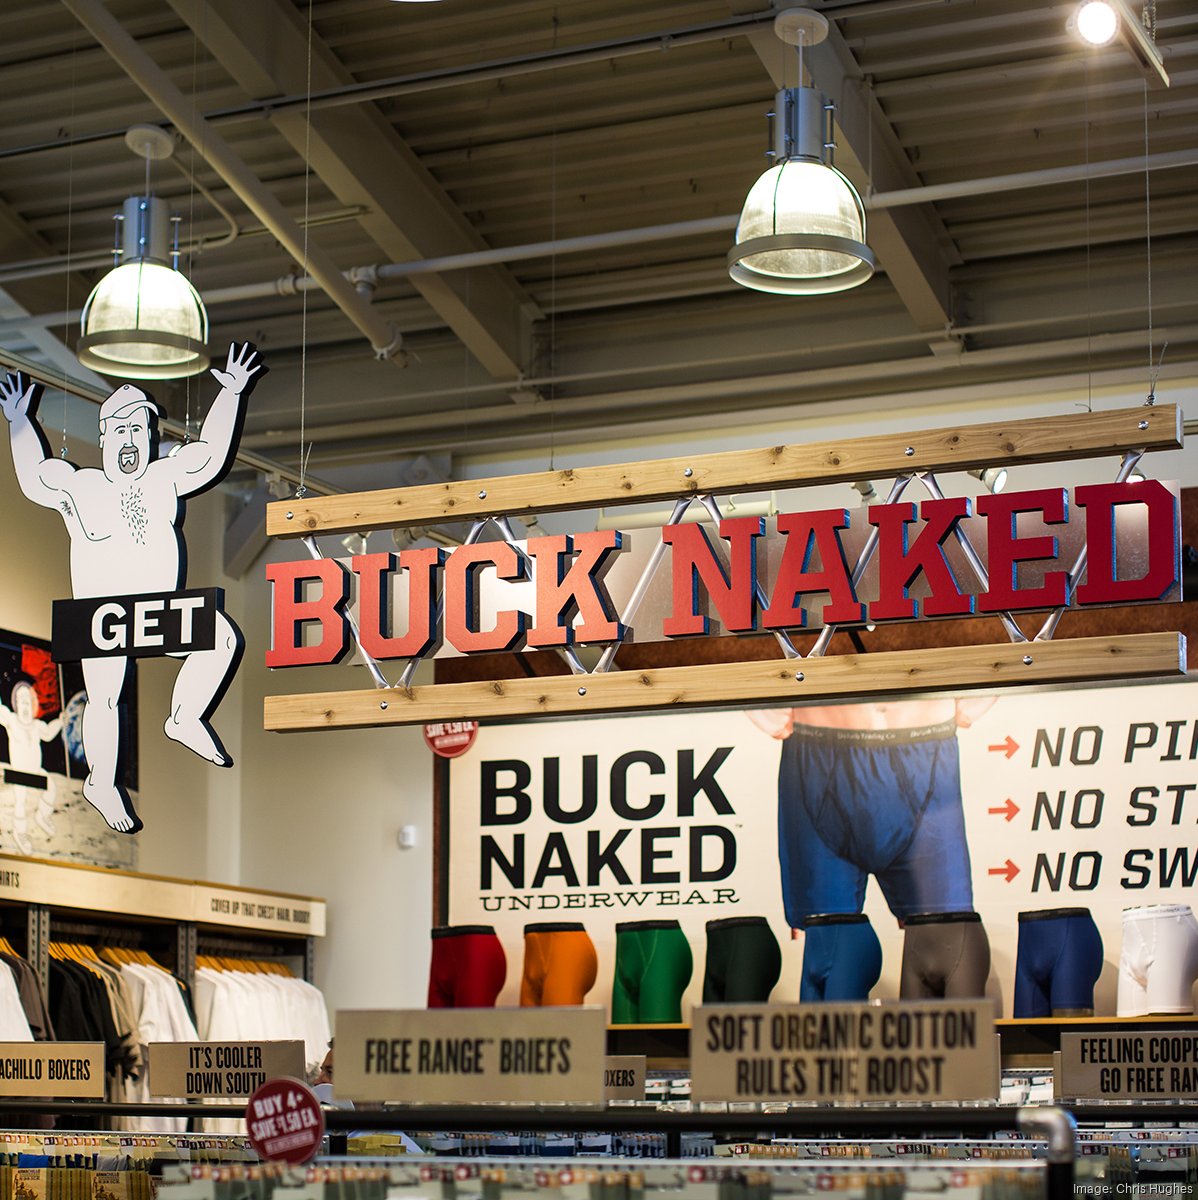 Danbury Looking Forward to Getting 'Buck Naked' With Duluth Store